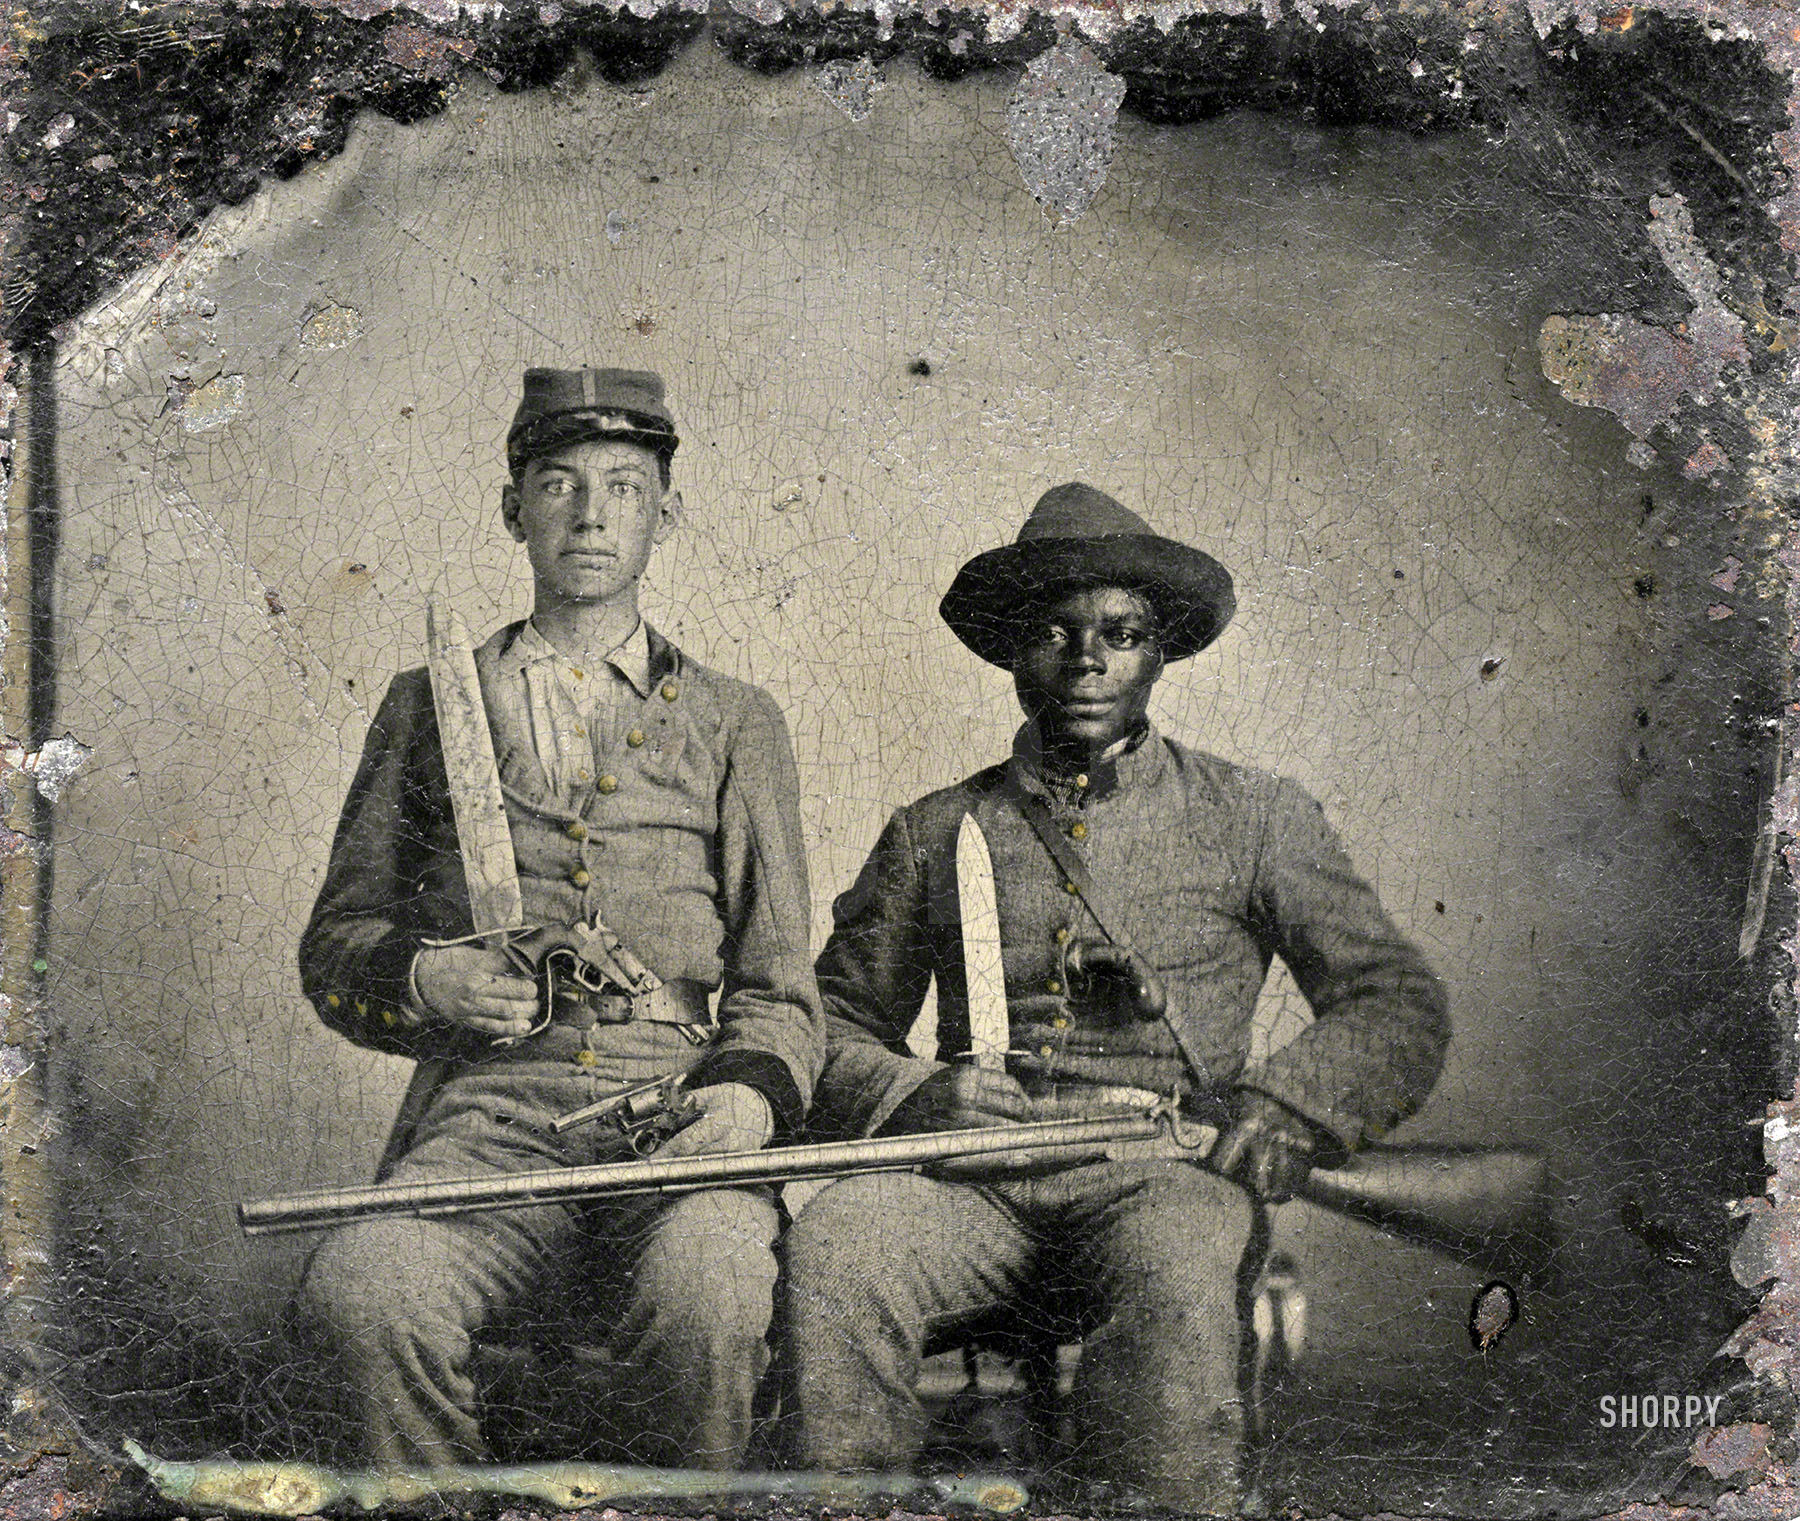 &nbsp; &nbsp; &nbsp; &nbsp; In 1861, A.M. Chandler enlisted in the Palo Alto Confederates, which became part of the 44th Mississippi Infantry Regiment. His mother, Louisa Gardner Chandler, sent Silas, one of her 36 slaves, with him. On Sept. 20, 1863, the 44th Mississippi was engaged in the Battle of Chickamauga, where Chandler was wounded in his leg. A battlefield surgeon decided to amputate but, according to the Chandler family, Silas accompanied him home to Mississippi where the limb was saved. His master's combat service ended as a result of the wound but Silas returned to the war in January 1864 when A.M.'s younger brother, Benjamin, enlisted in the 9th Mississippi Cavalry Regiment. (See also: A Slave's Service in the Confederate Army.
"Sergeant A.M. Chandler of the 44th Mississippi Infantry Regiment, Co. F., and Silas Chandler, family slave, with Bowie knives, revolvers, pepper-box, shotgun, and canteen." Handwritten label on back of frame: "Andrew Martin Chandler, born 1844, died 1920. Servant Silas Chandler. 44th Mississippi Regiment, Col. A.K. Blyth. Wounded in battle of Chickamauga." View full size.